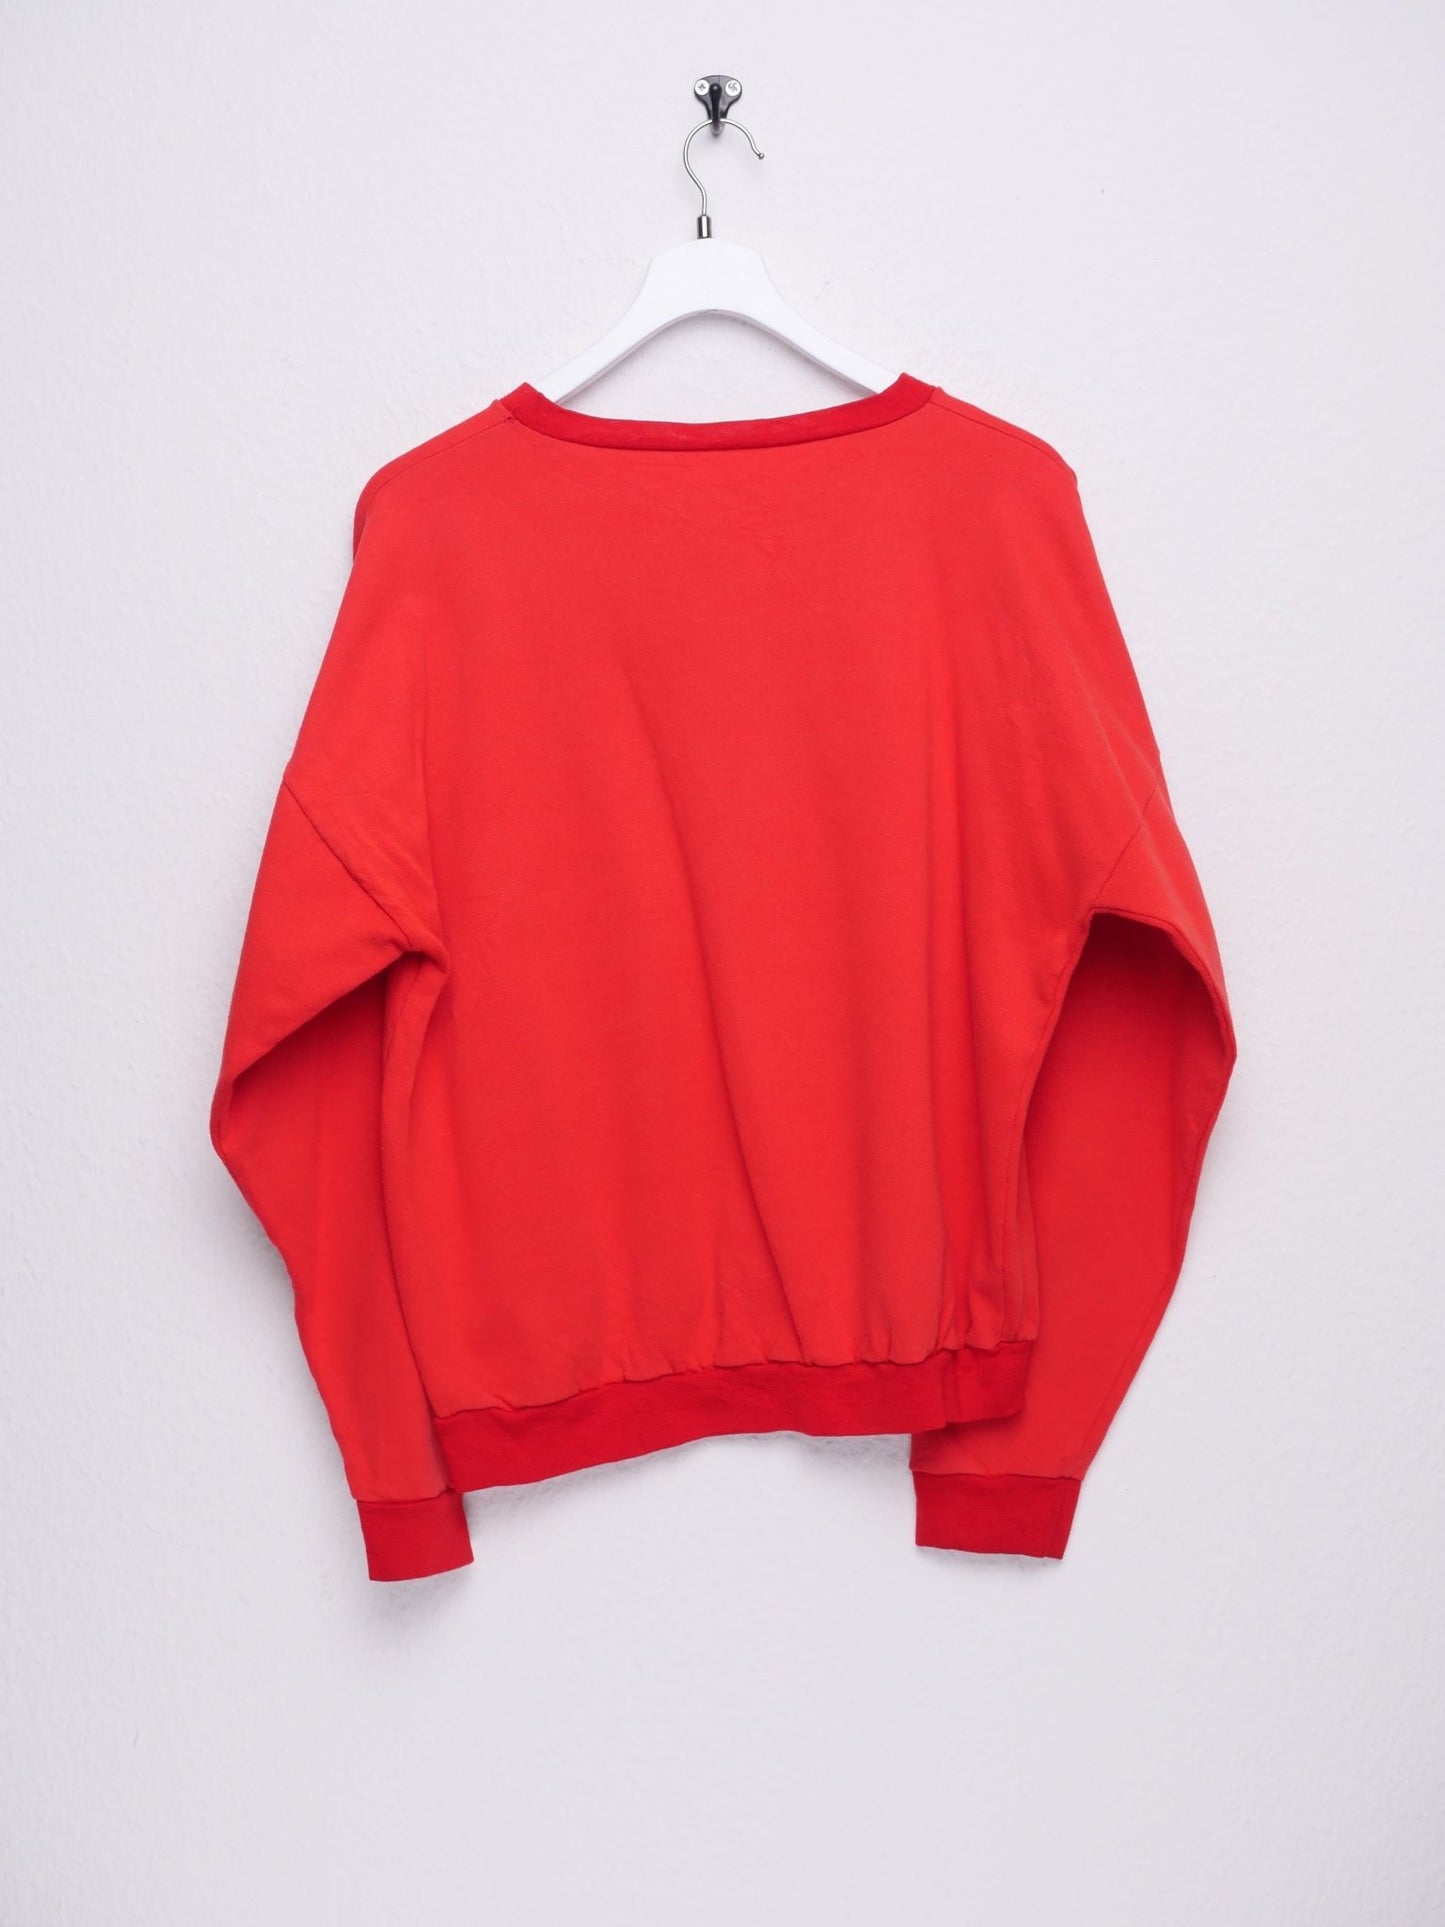 'Energie Service' printed Graphic red Sweater - Peeces